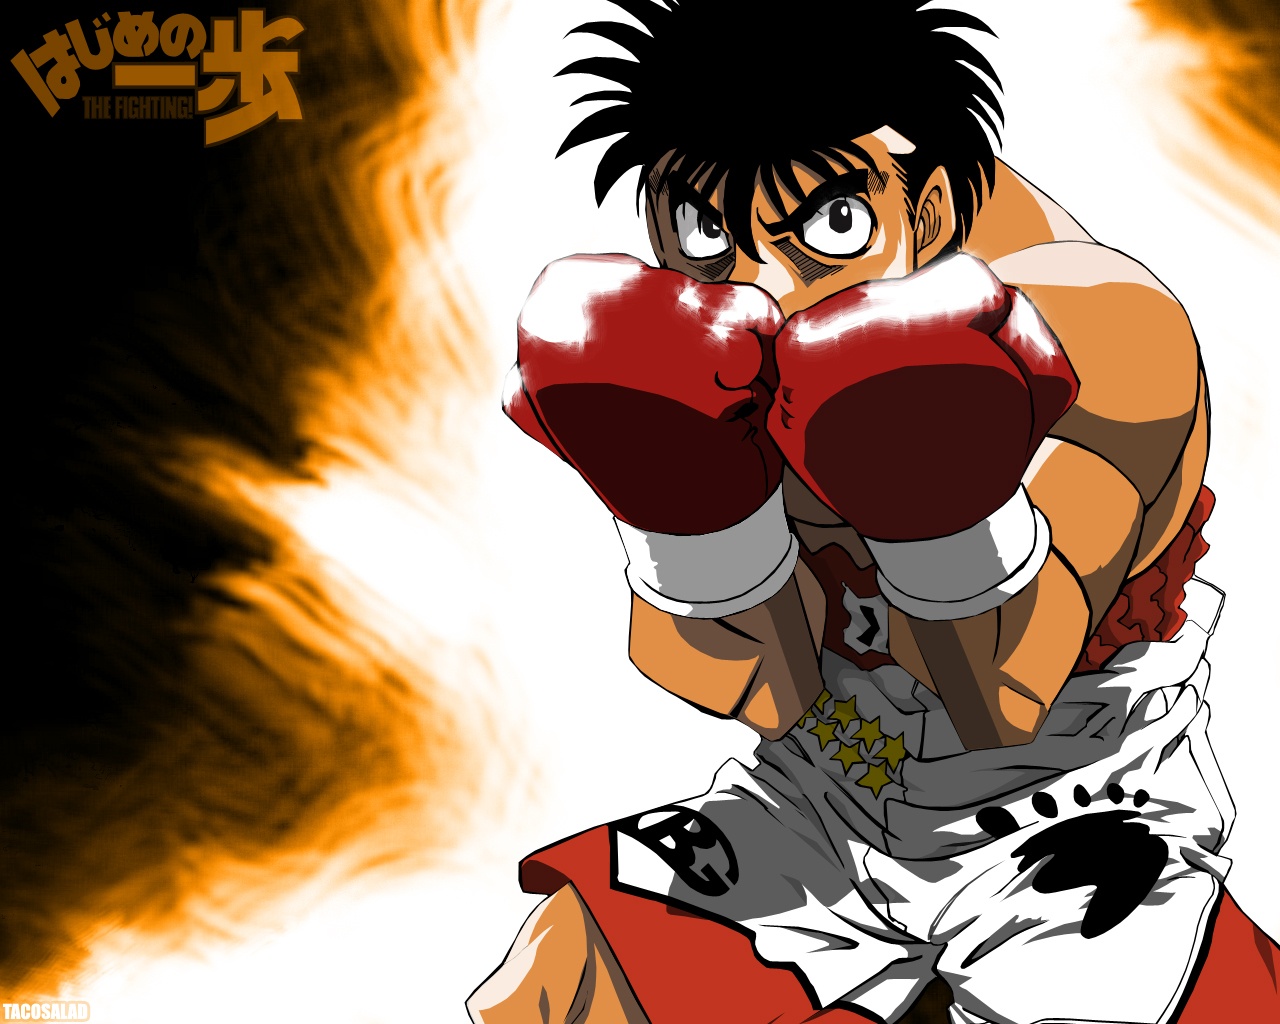 My thoughts on: Hajime no Ippo